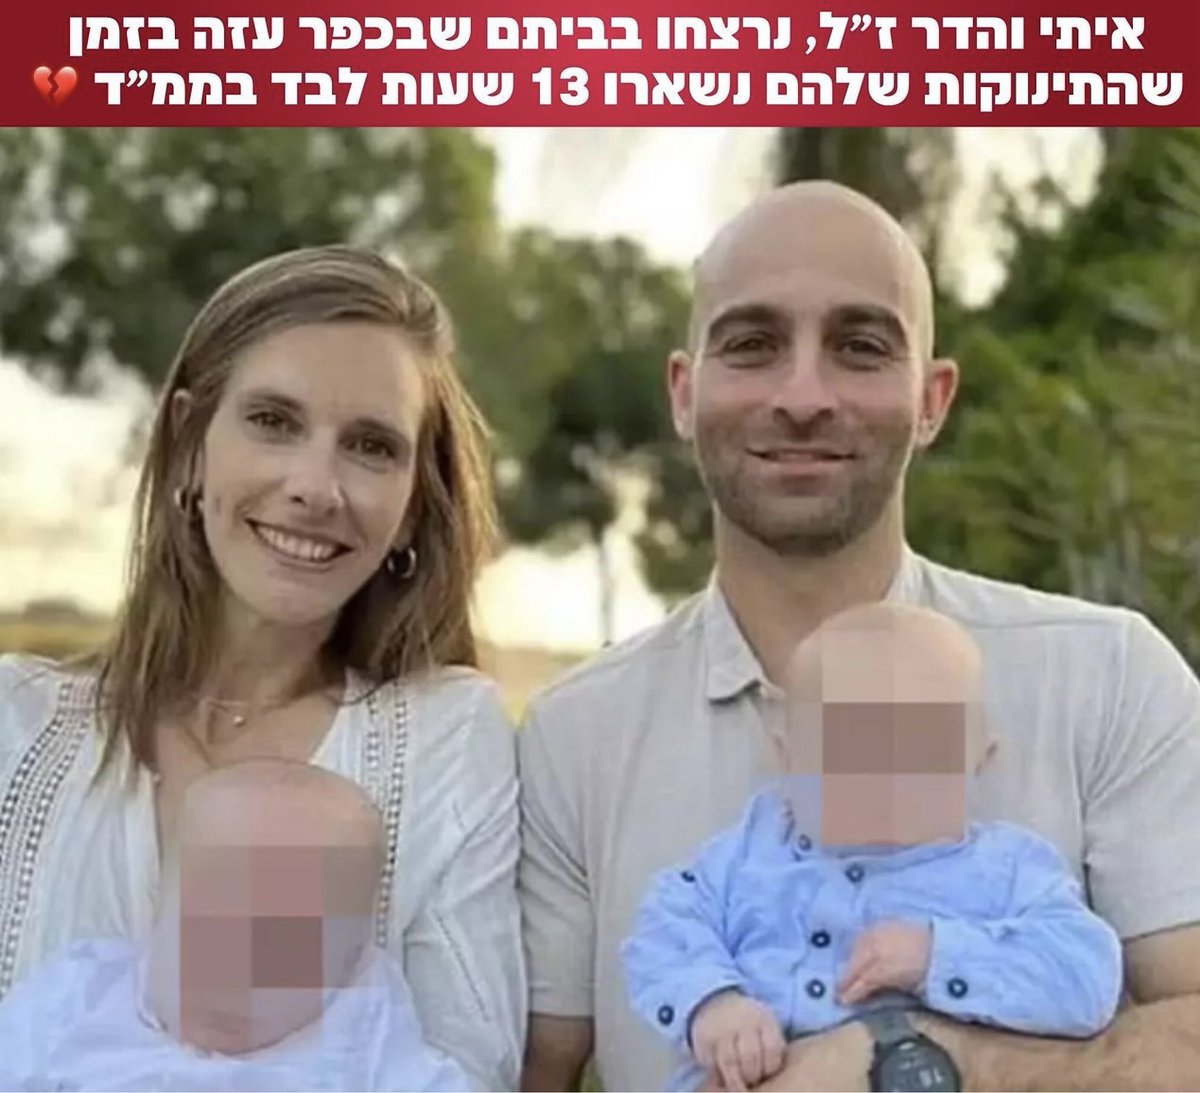 Itay and the Hadar, were murdered in their home in Kfar Aza while their babies were left alone in the shelter for 13 hours.

As I read those two lines, tears filling my eyes, I pray for their blood to be avenged.

We will #NeverForget and #NeverForgive !